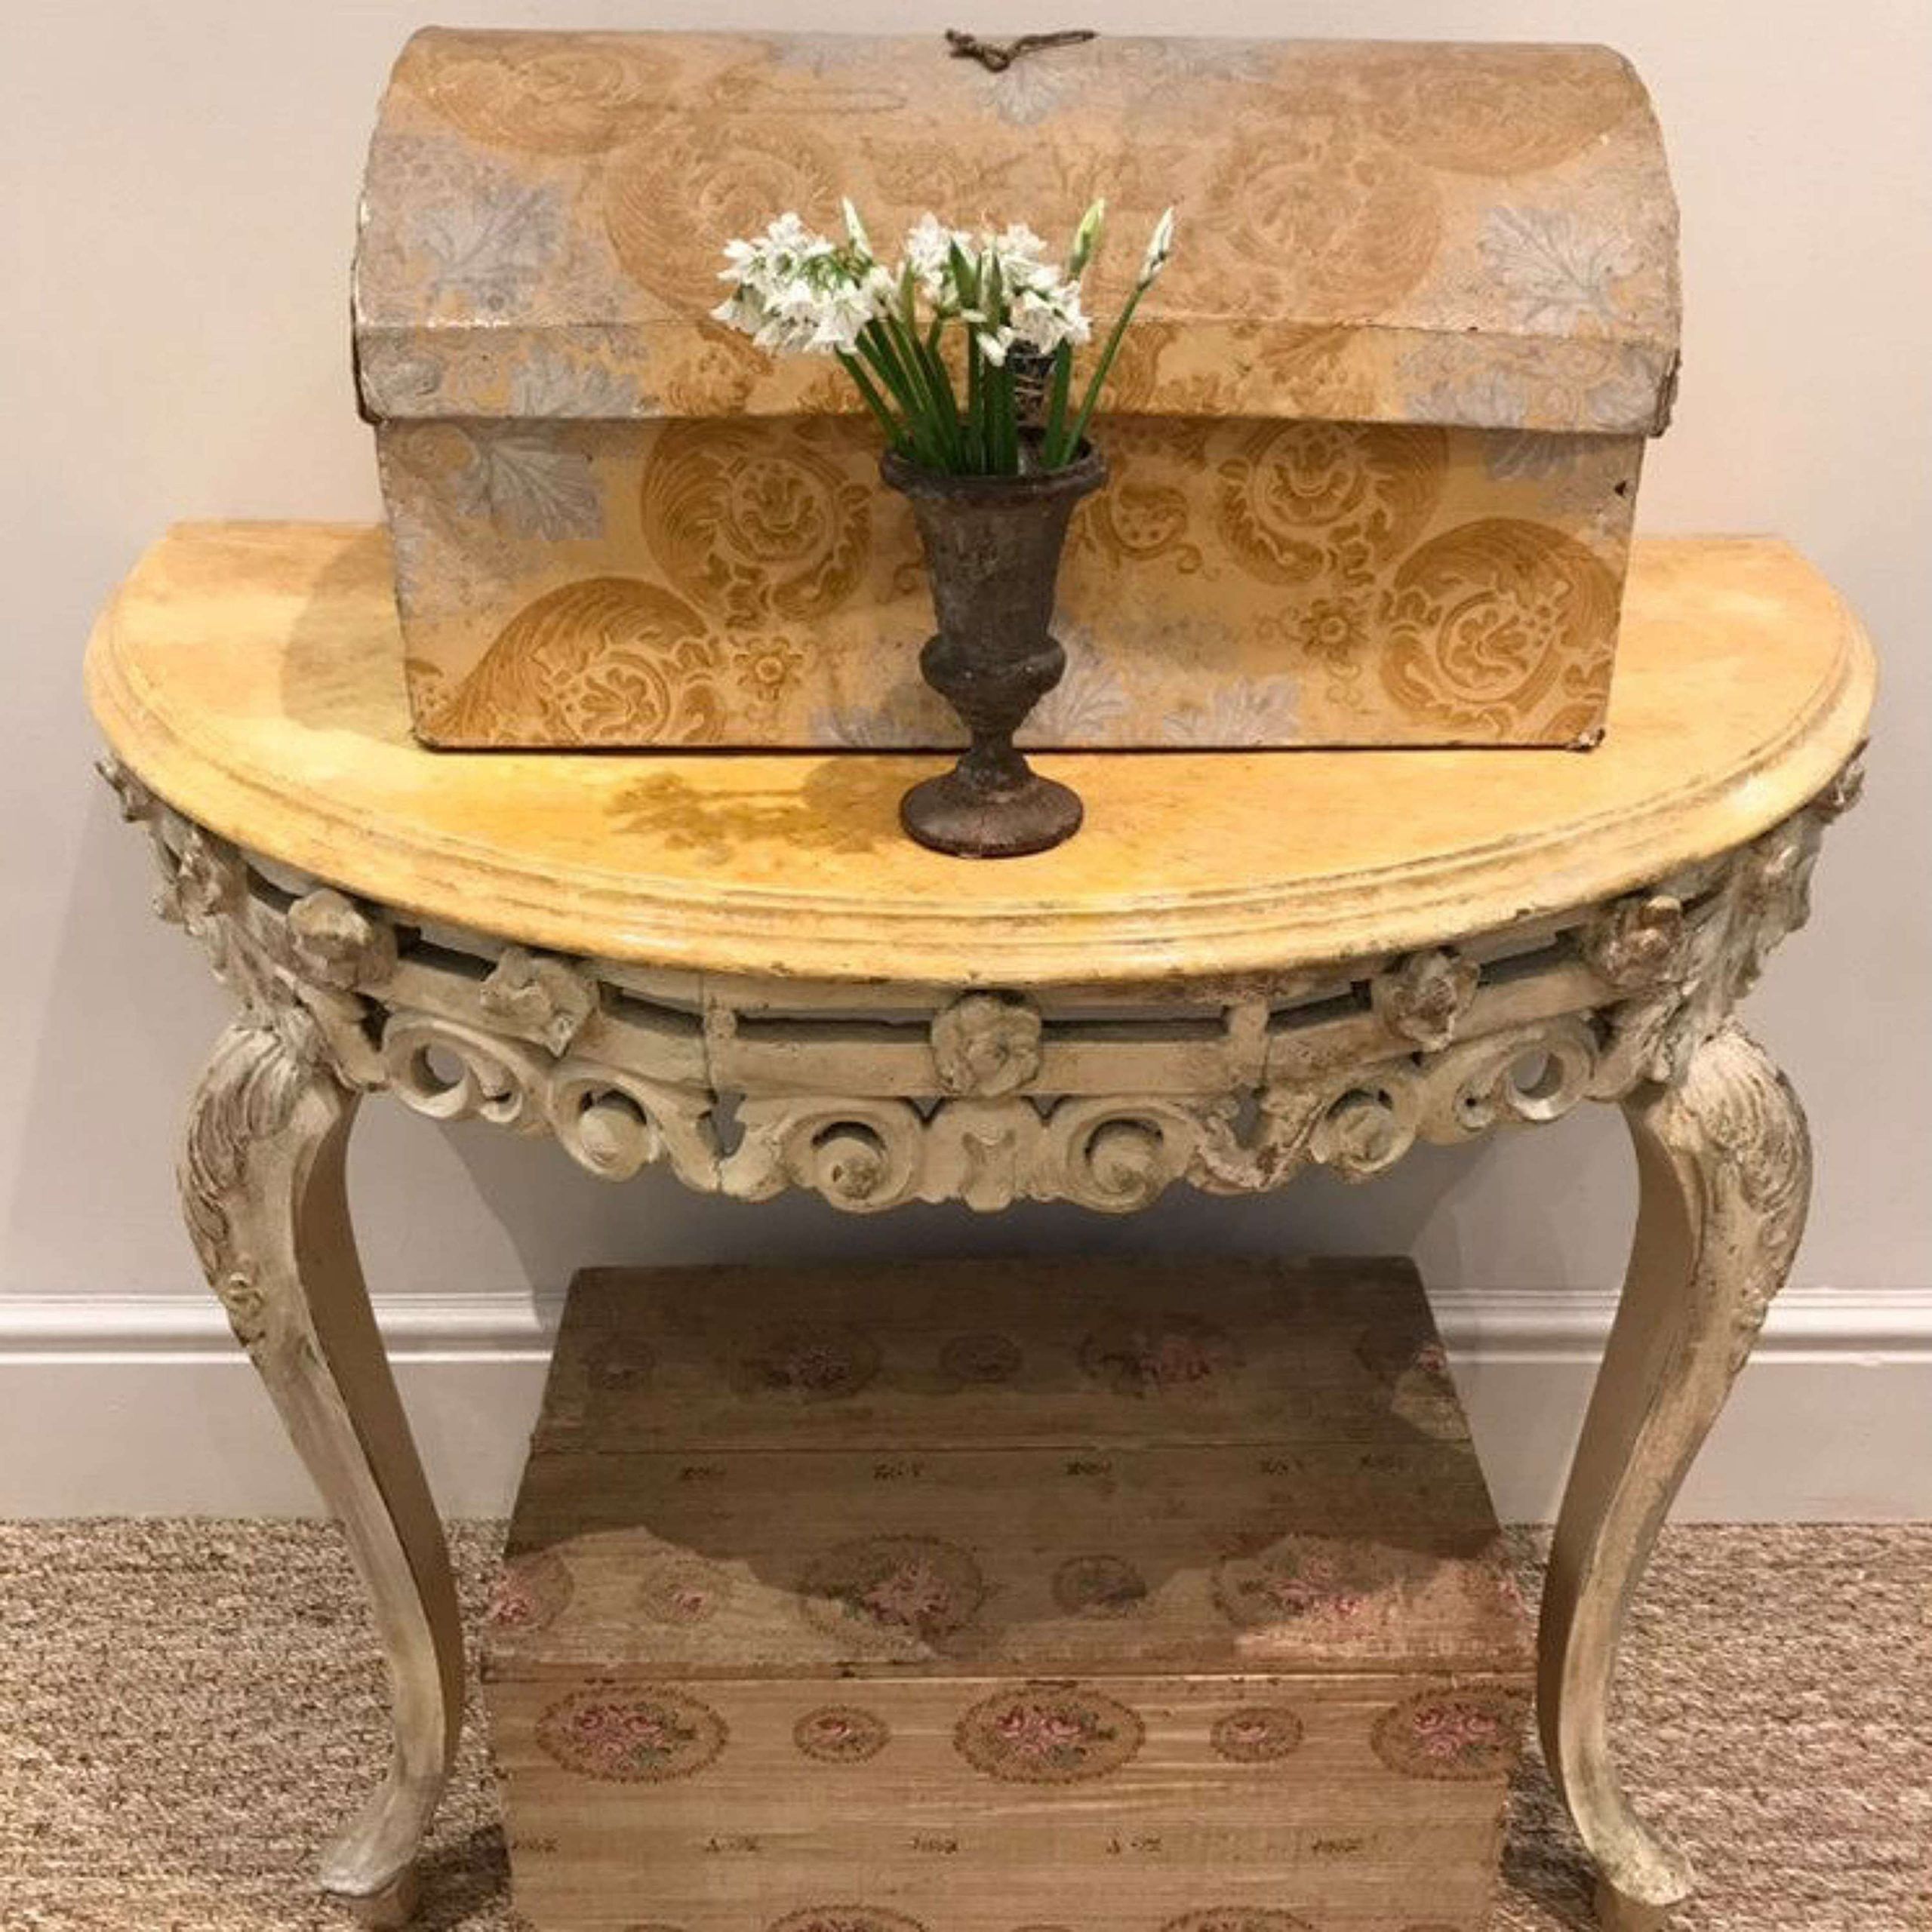 Early 20th Century Wooden Console Table In Antique Console Throughout Antique Gold And Glass Console Tables (View 20 of 20)